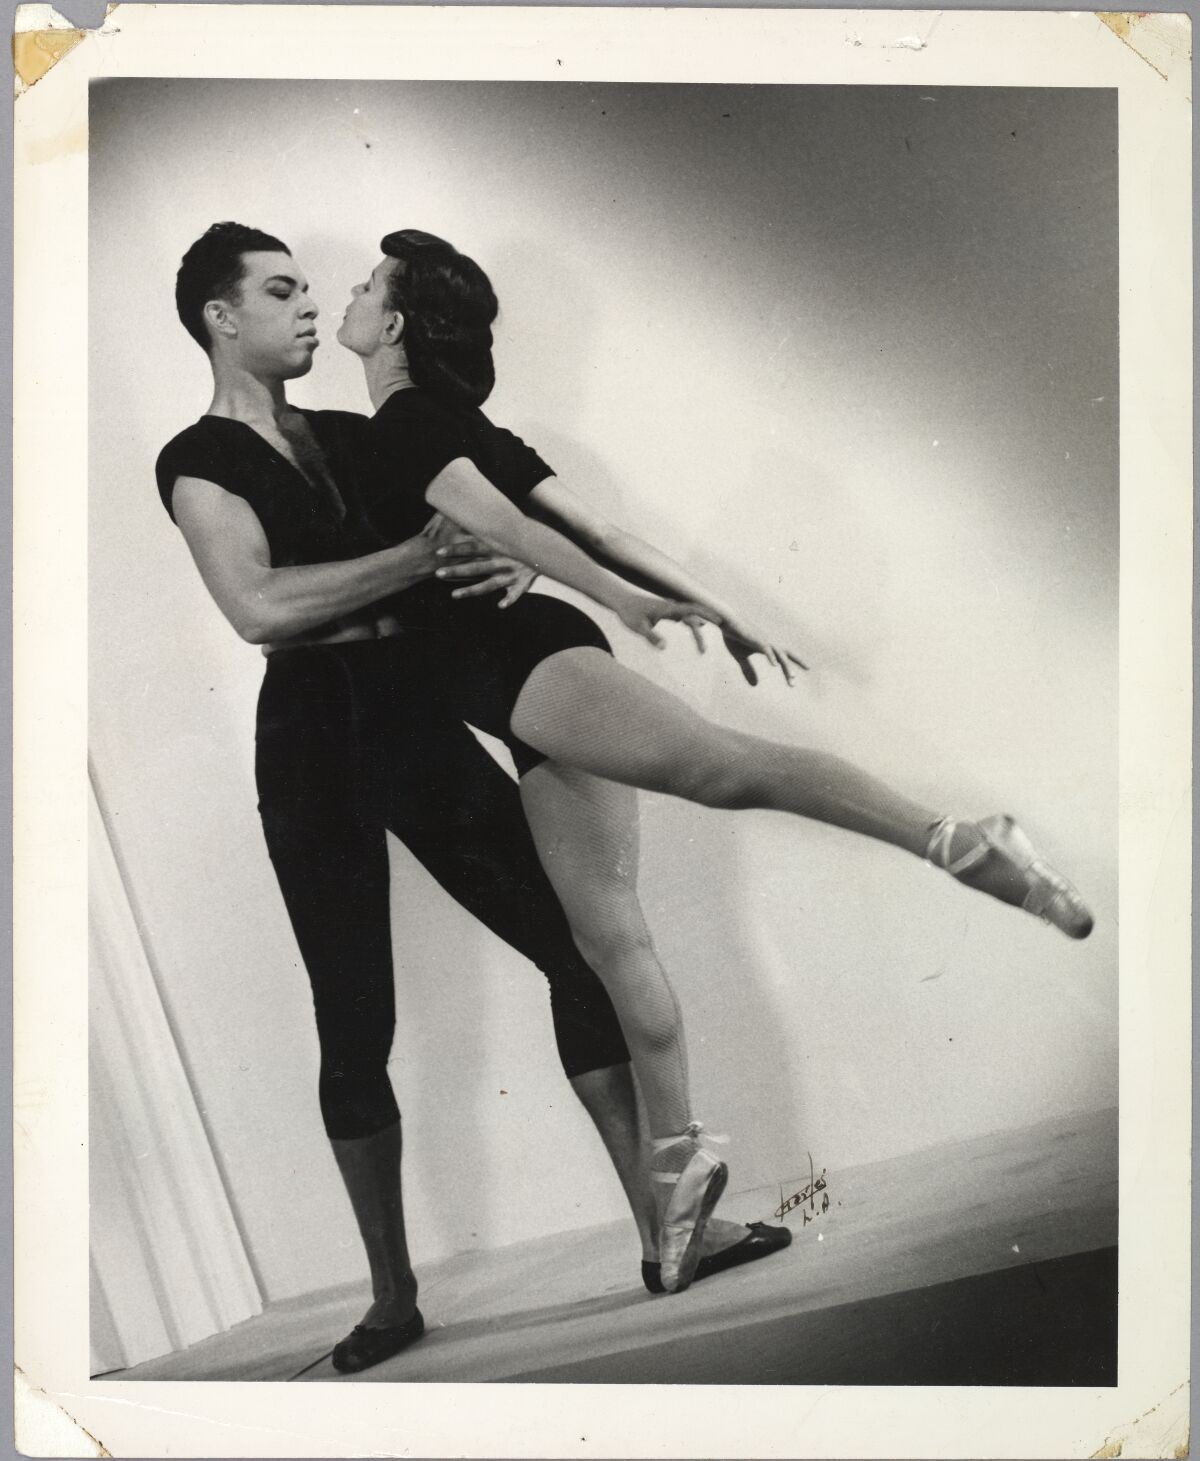 A vertical black-and-white full-body photo of ballet dancers James Truitte and Bernice Harrison in a dance pose. 